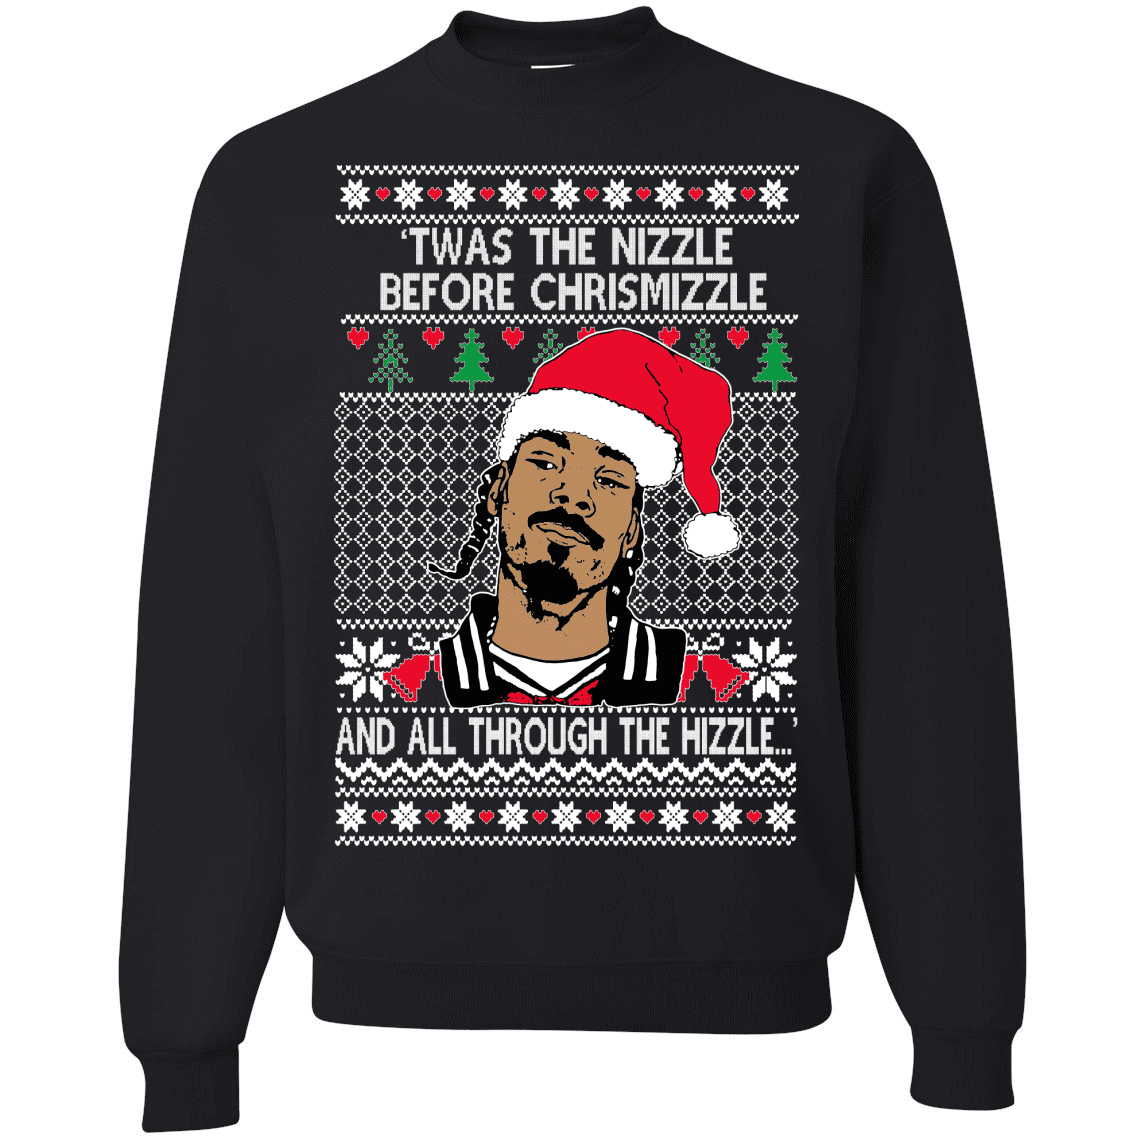 Unisex Holiday Sweaters Ugly Christmas Sweaters for Men and Women